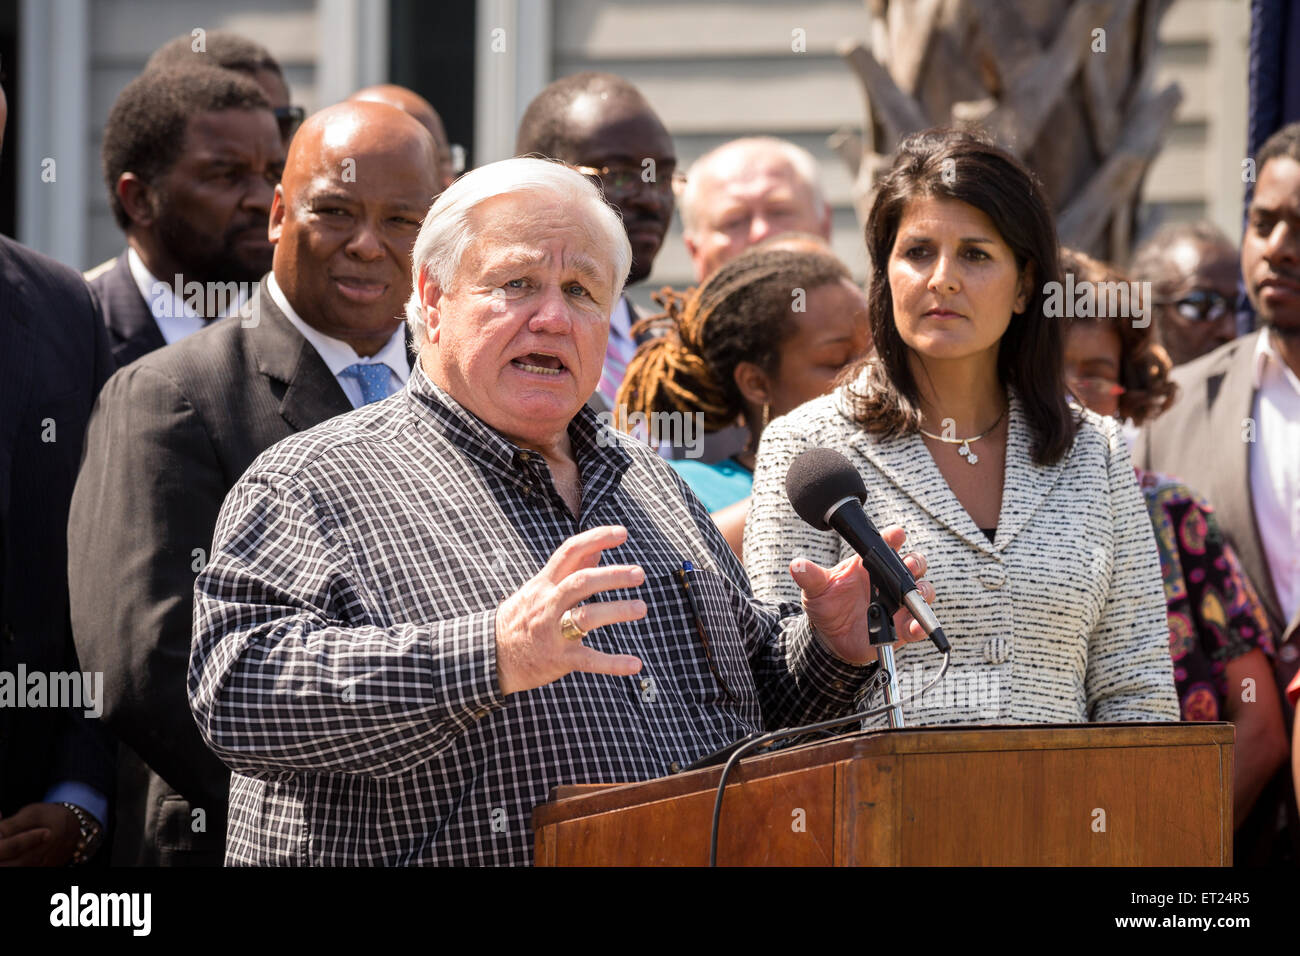 North Charleston Mayor Keith Summey speaks at a signing ceremony for the first bill in the nation requiring all police to wear video cameras as Governor Nikki Haley looks on June 10, 2015 in North Charleston, South Carolina. The bill was a result of the killing of Walter Scott by a police officer in North Charleston in April. Stock Photo